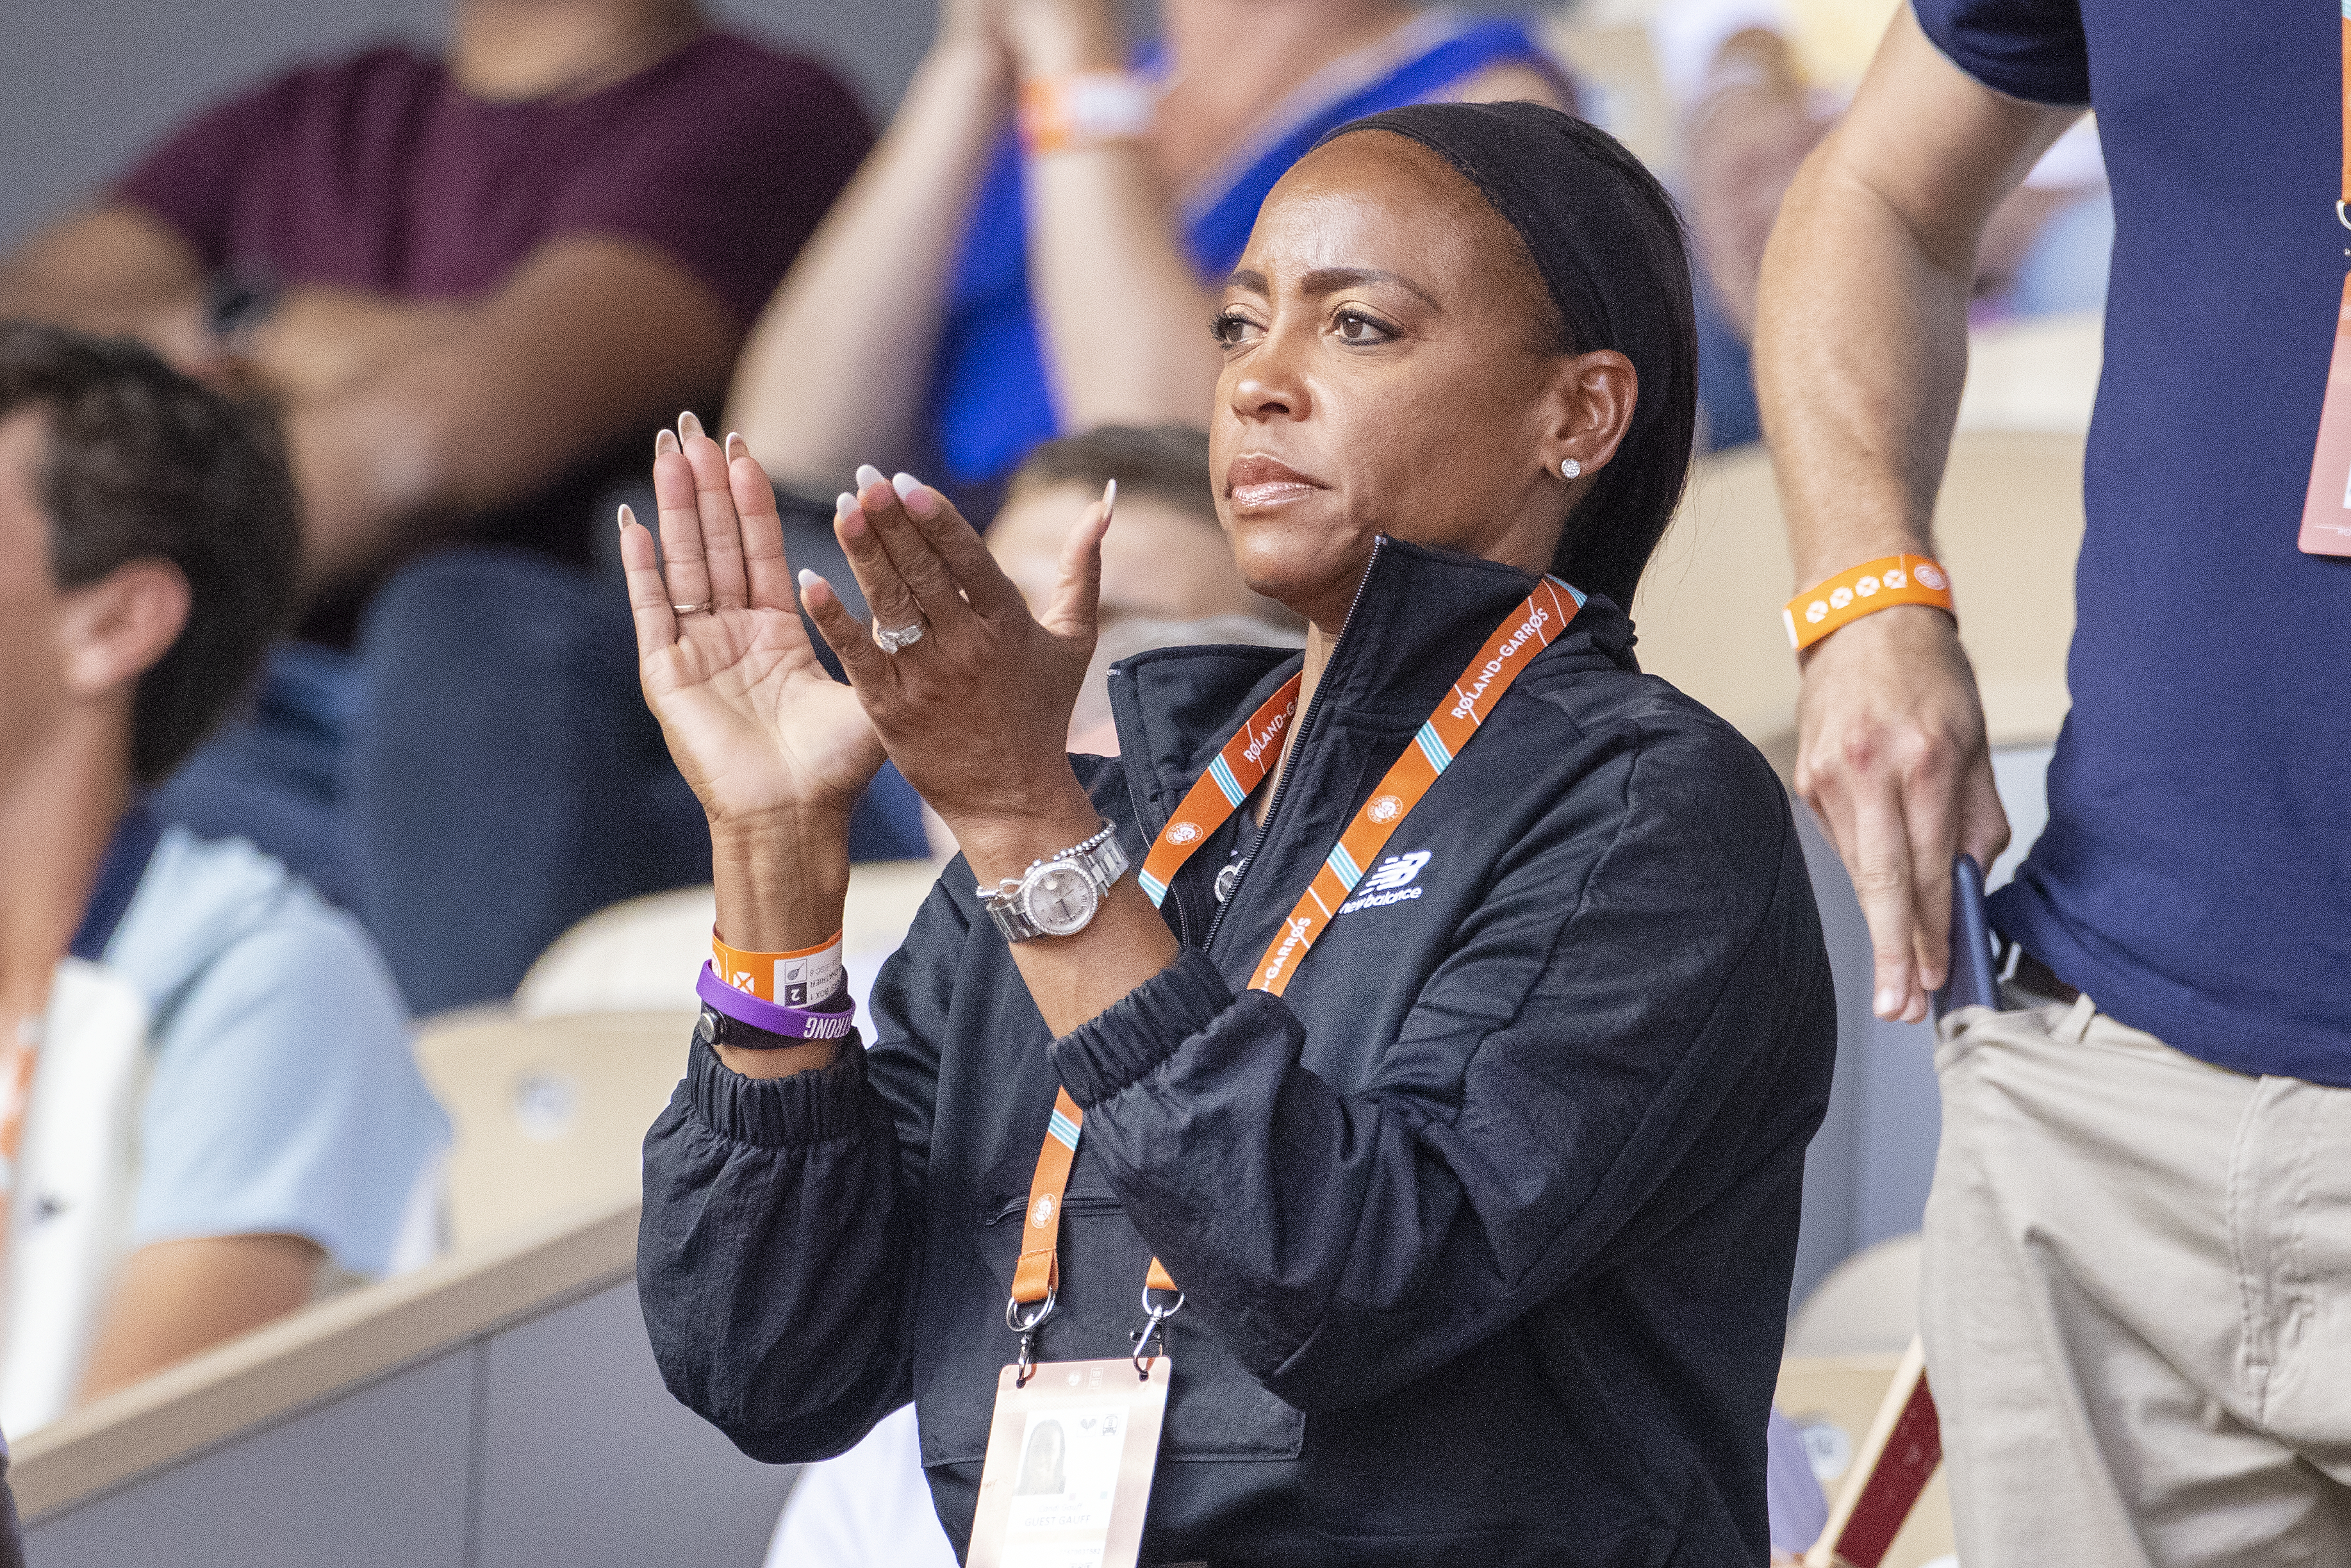 Candi Gauff applauds her daughter, Coco Gauff, during her match against Martina Trevisan of Italy during the Singles Semi-Final match at Court Philippe Chatrier at the 2022 French Open Tennis Tournament on June 2, 2022, in Paris, France. | Source: Getty Images